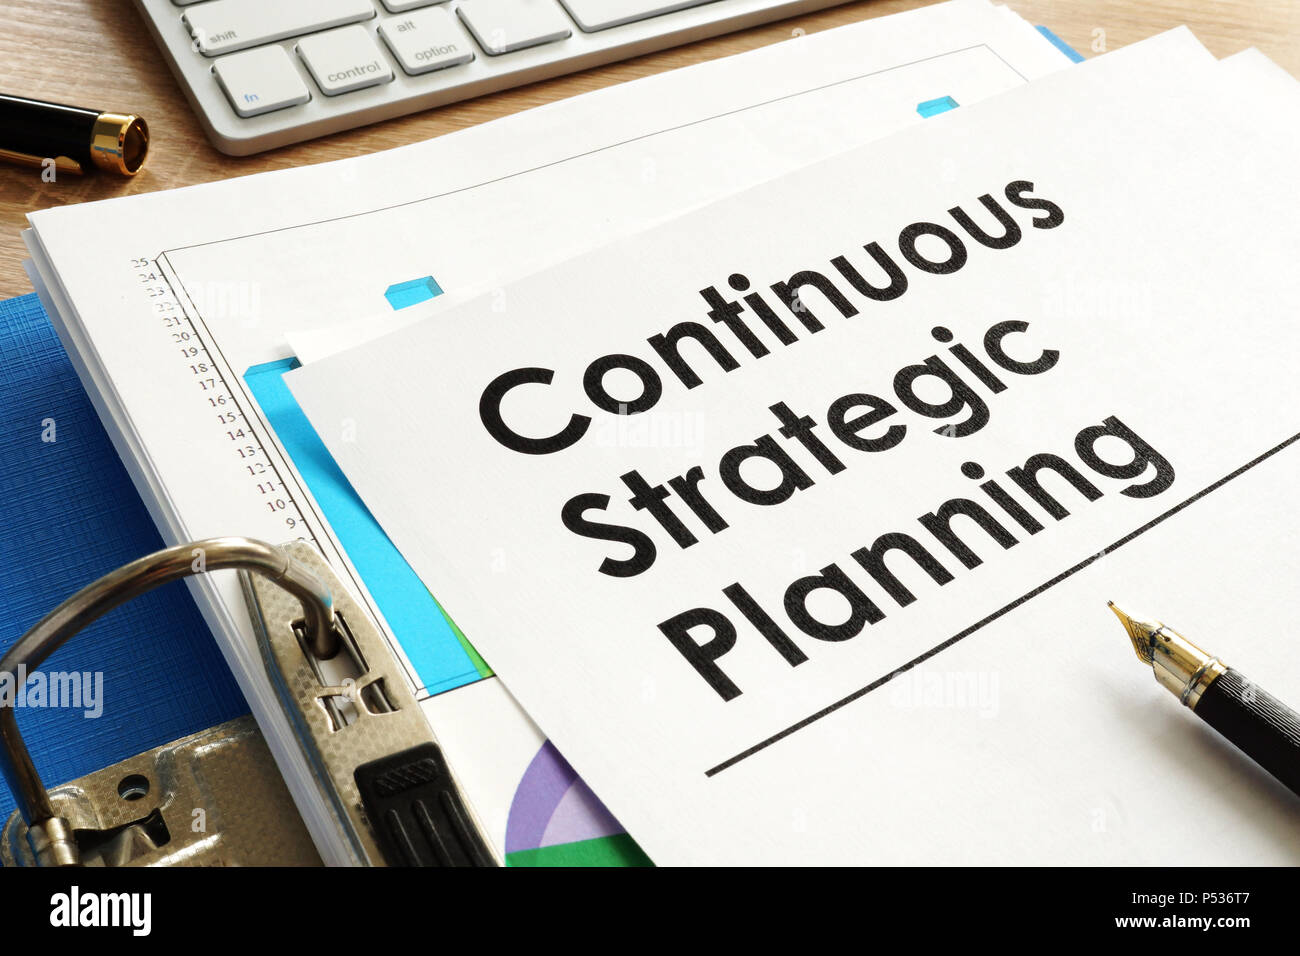 Continuous Strategic Planning on an office table. Stock Photo